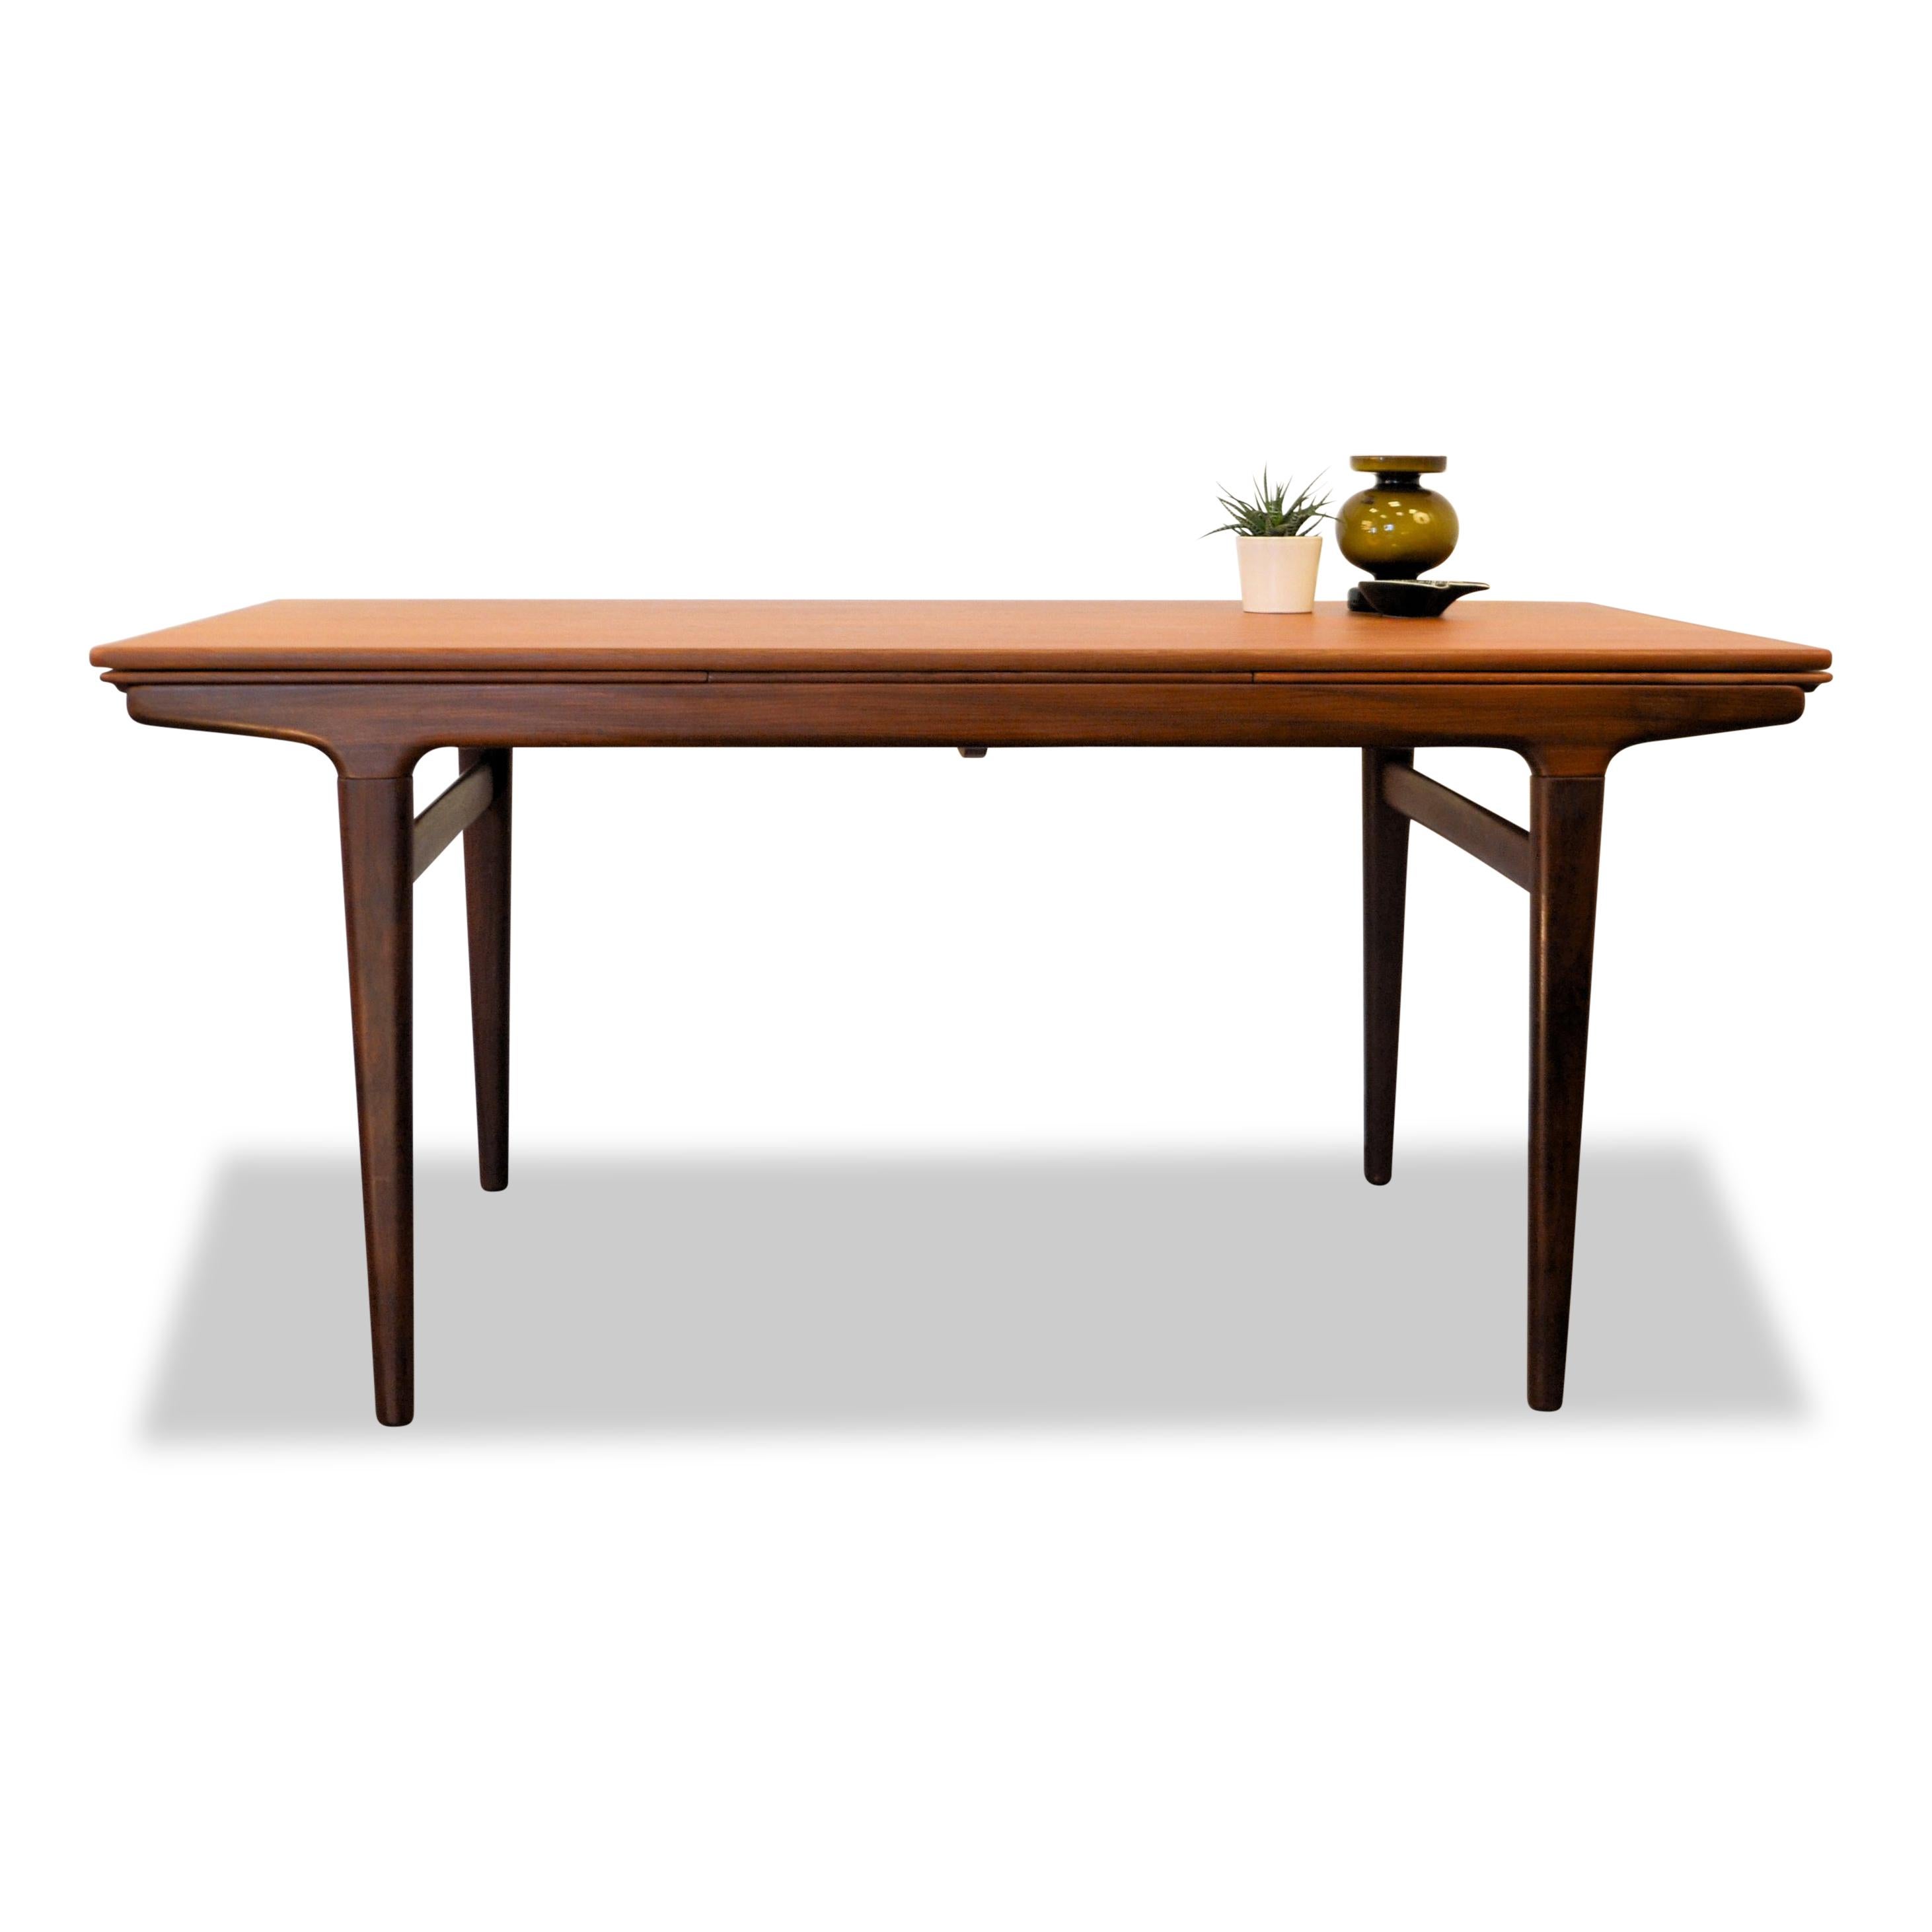 Gorgeous Danish modern teak dining table designed by Johannes Andersen for Uldum Møbelfabrik. Featuring a clean, timeless design and beautiful teak wood. You’ll easily host up to ten (!) dinner guests with the pull-out extension pieces which add up